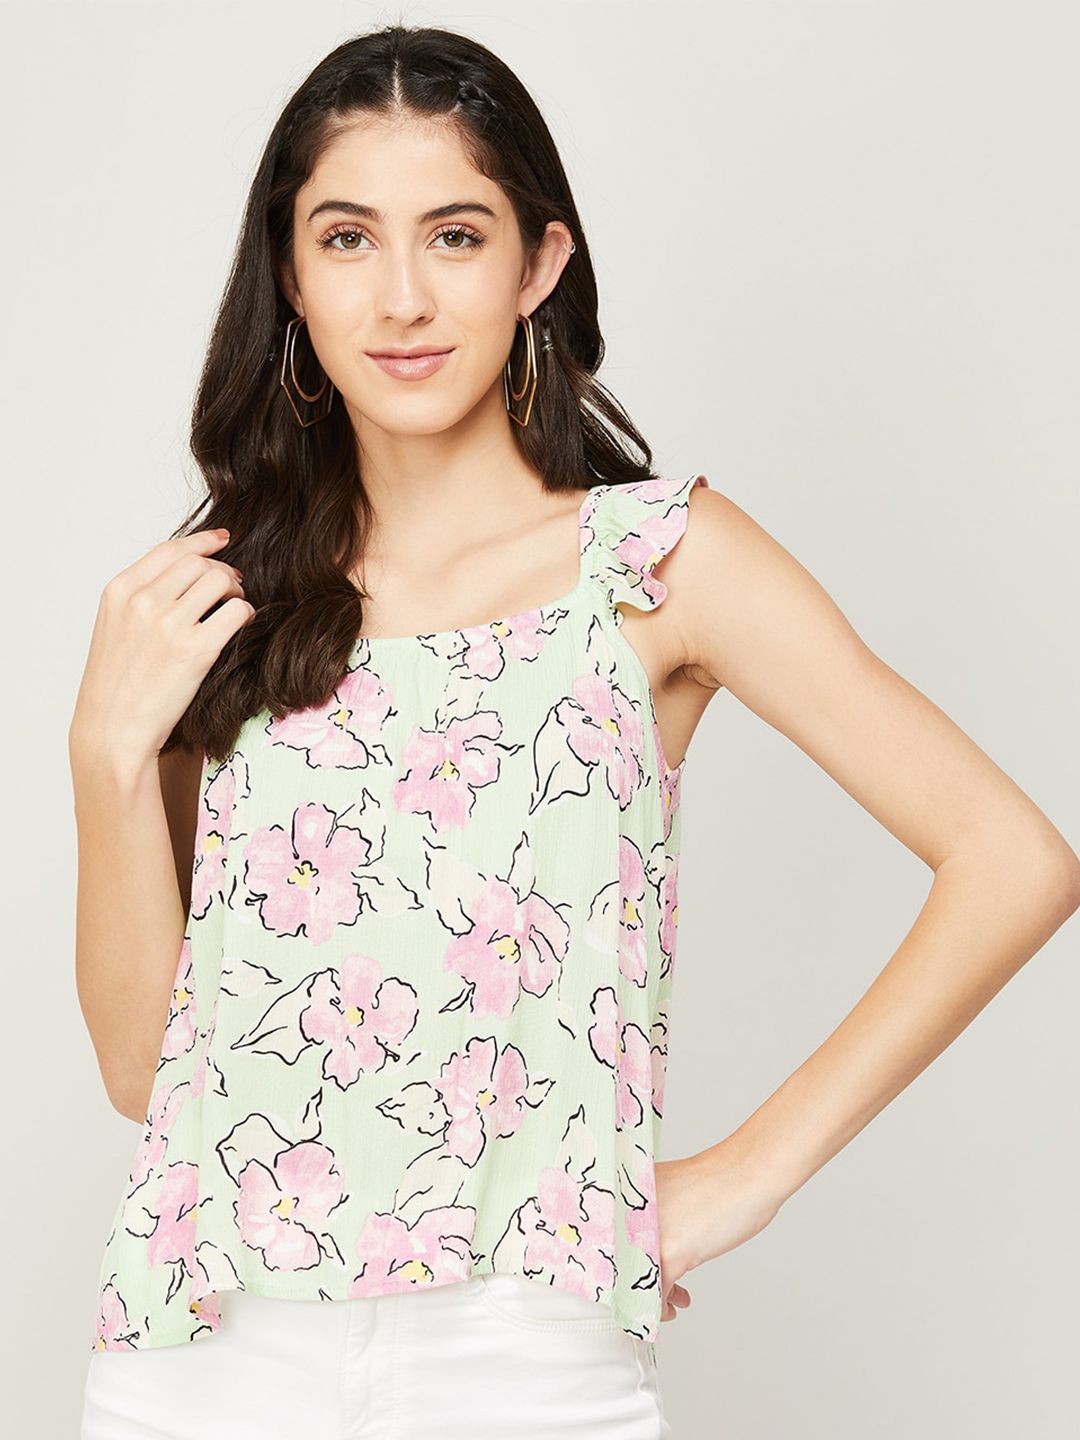 Ginger by Lifestyle Floral Print Top Price in India